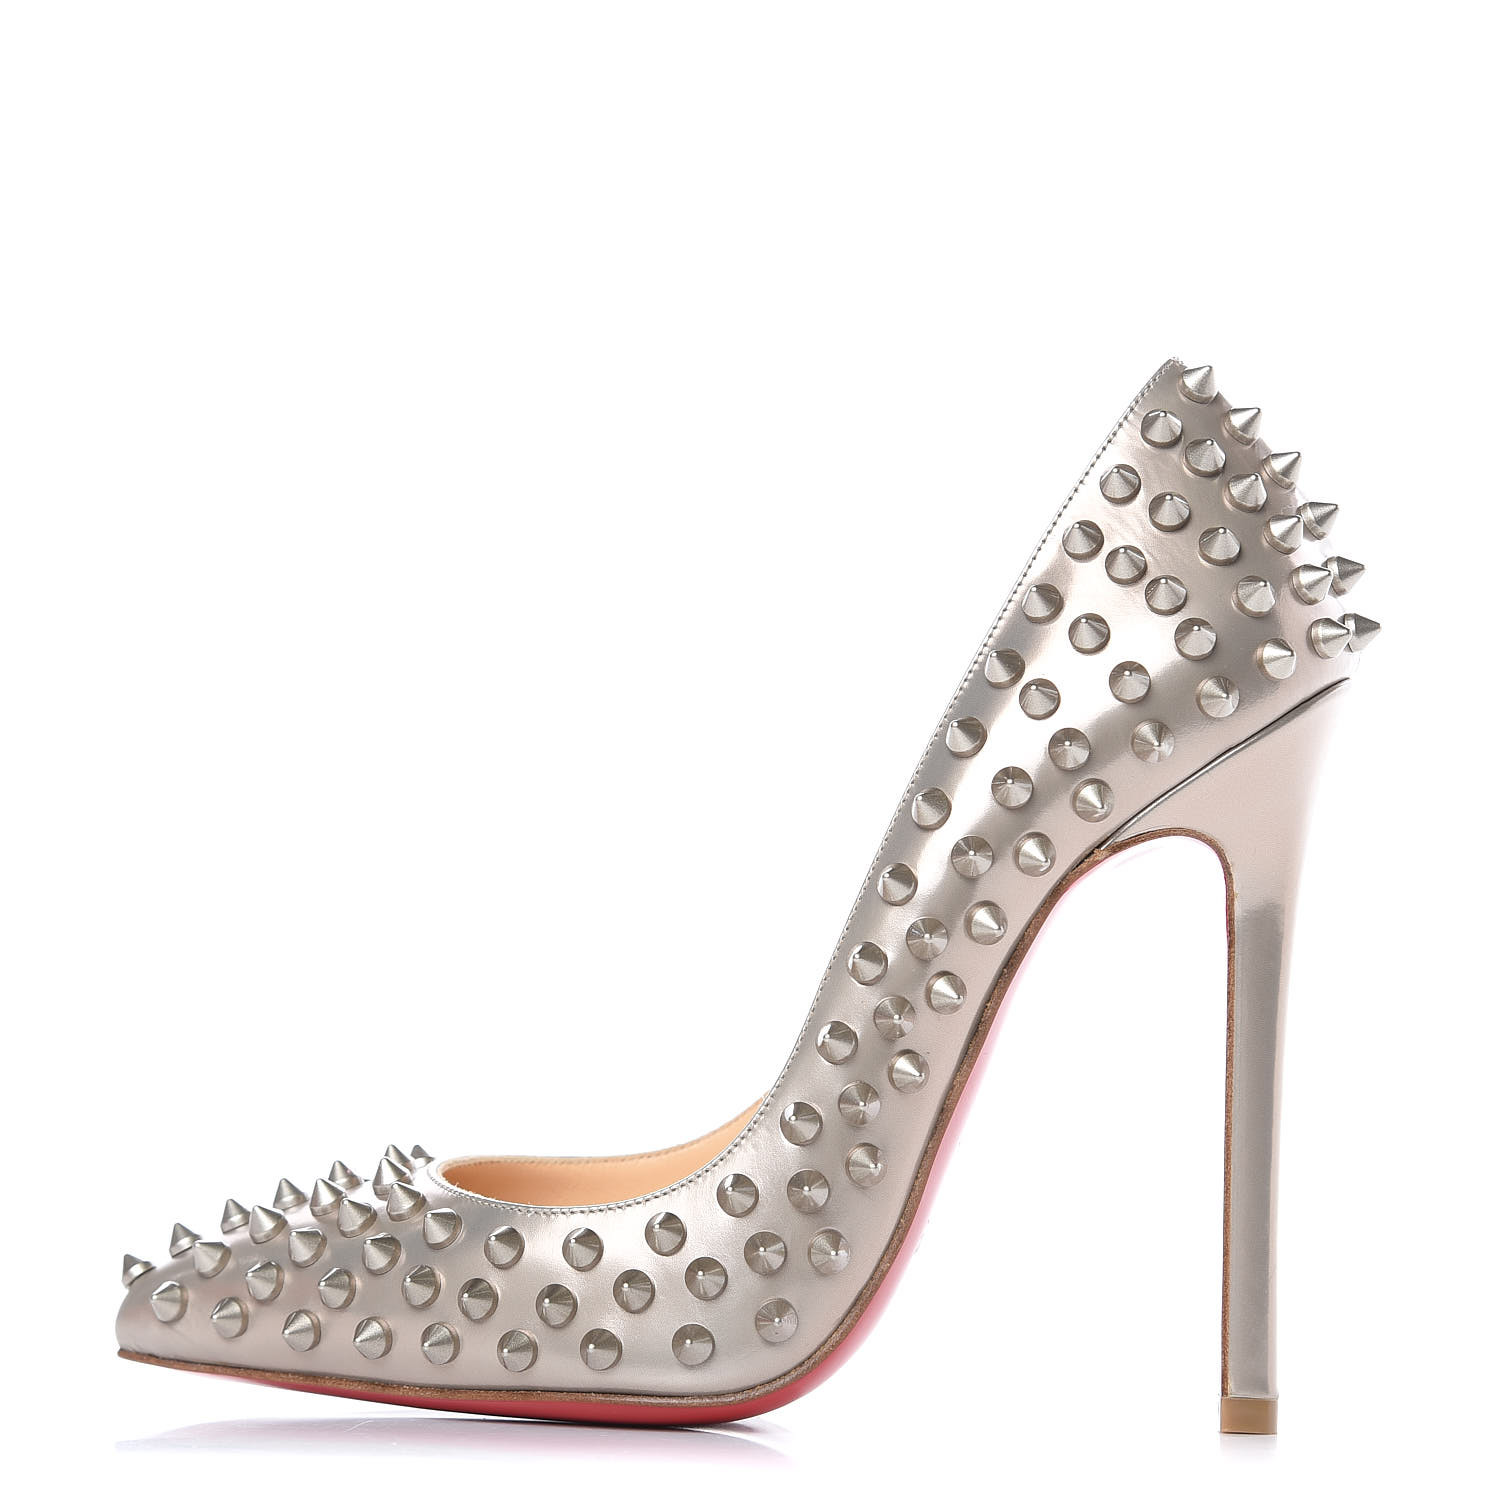 CHRISTIAN LOUBOUTIN Pigalle Spikes 120 Pumps 37 405830 | FASHIONPHILE